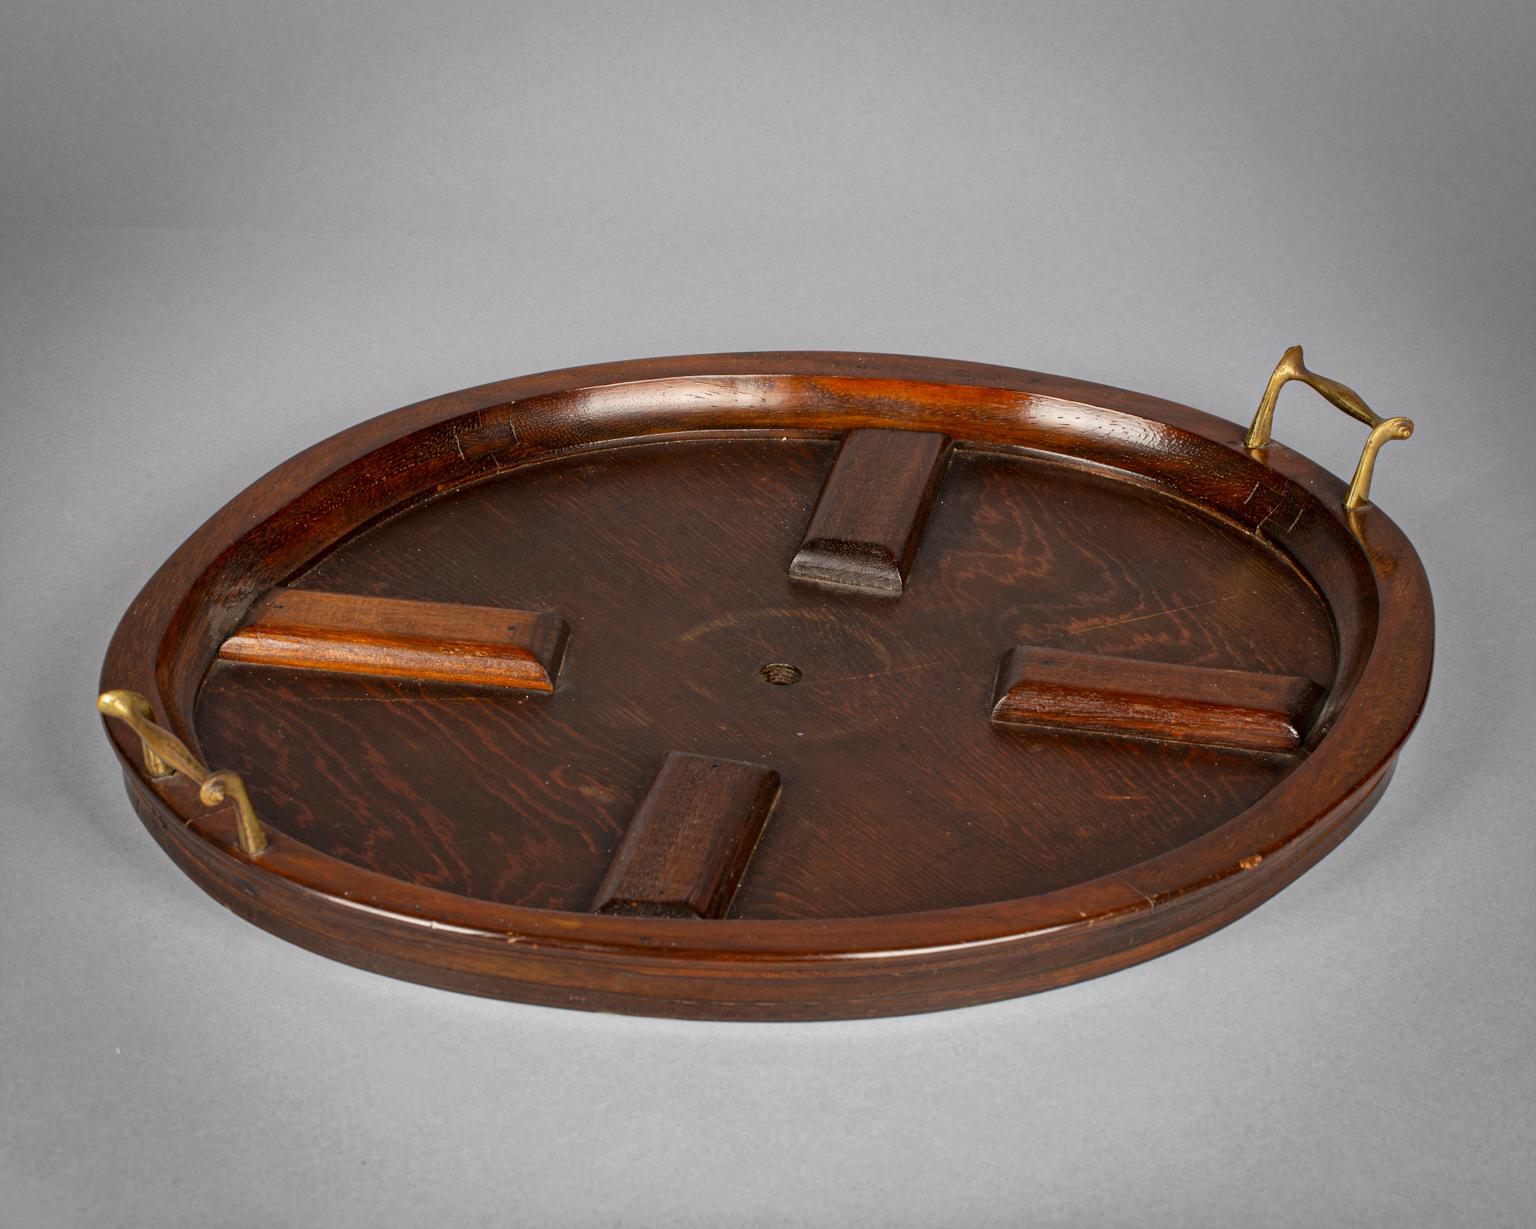 Mid-19th Century English Porcelain Five-Part Serving Set on a Wooden Tray, circa 1830 For Sale